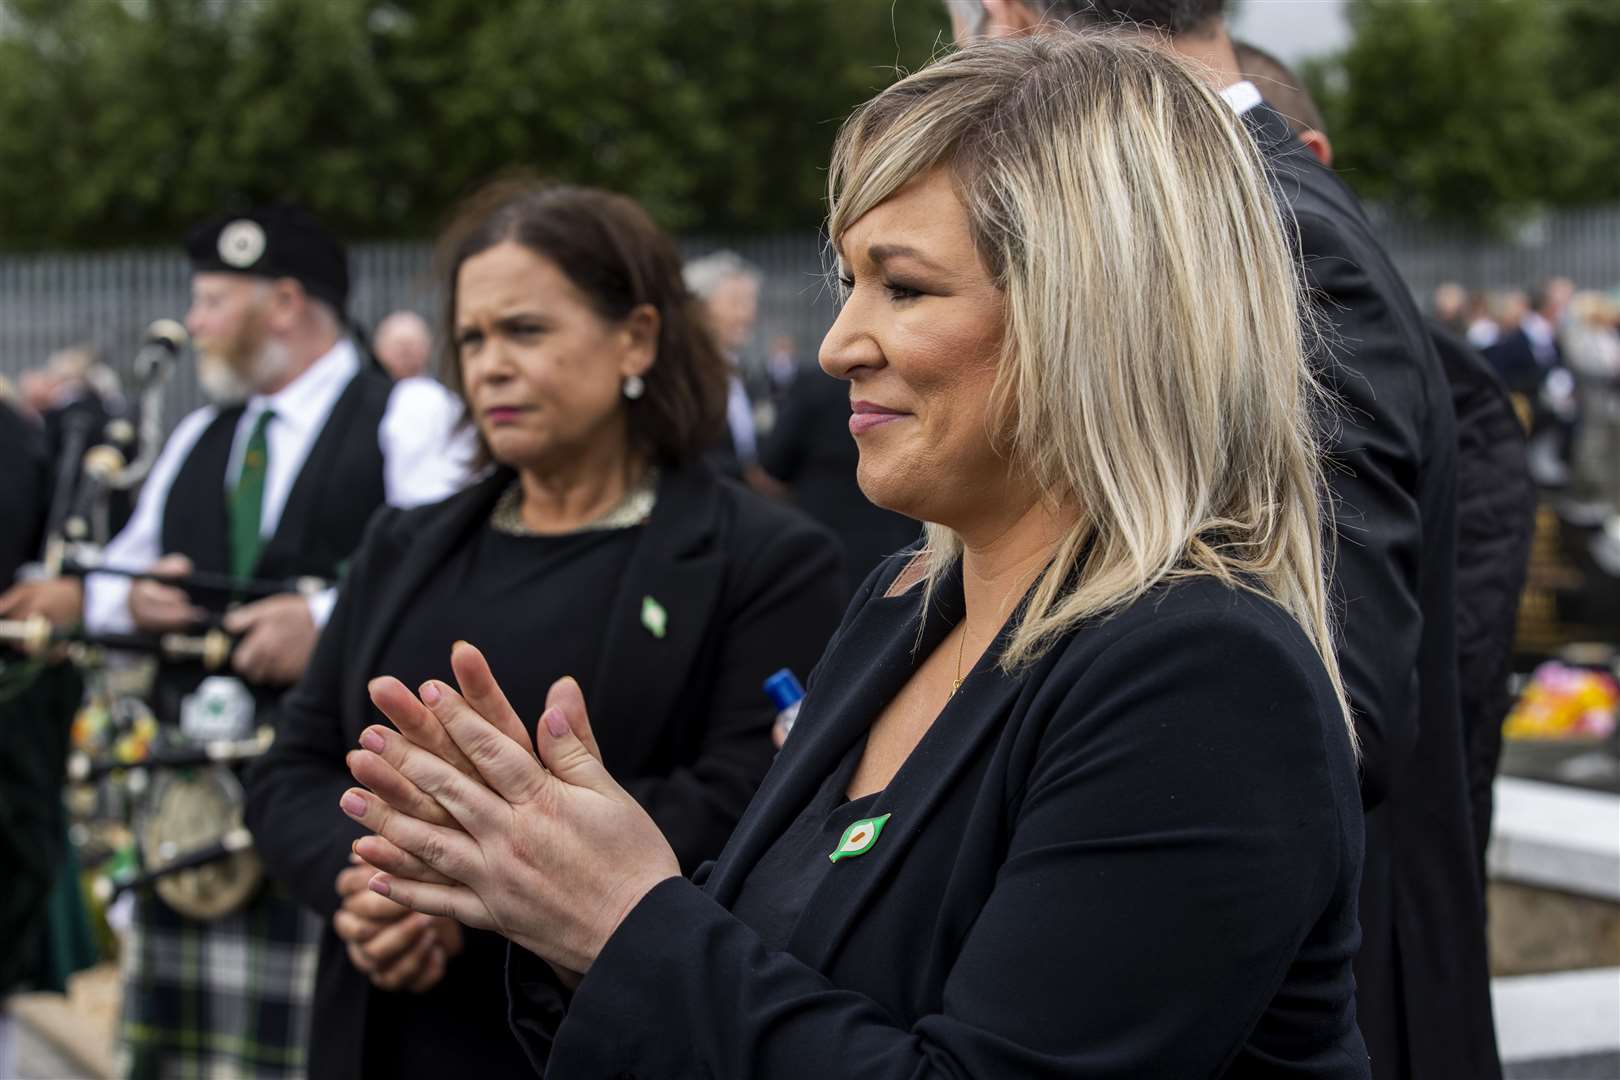 The then deputy First Minister Michelle O’Neill during the funeral of senior republican Bobby Storey in west Belfast in June 2020, a gathering that was seen by many within health and social care as a ‘blatant breach’ of Covid regulations (Liam McBurney/PA)